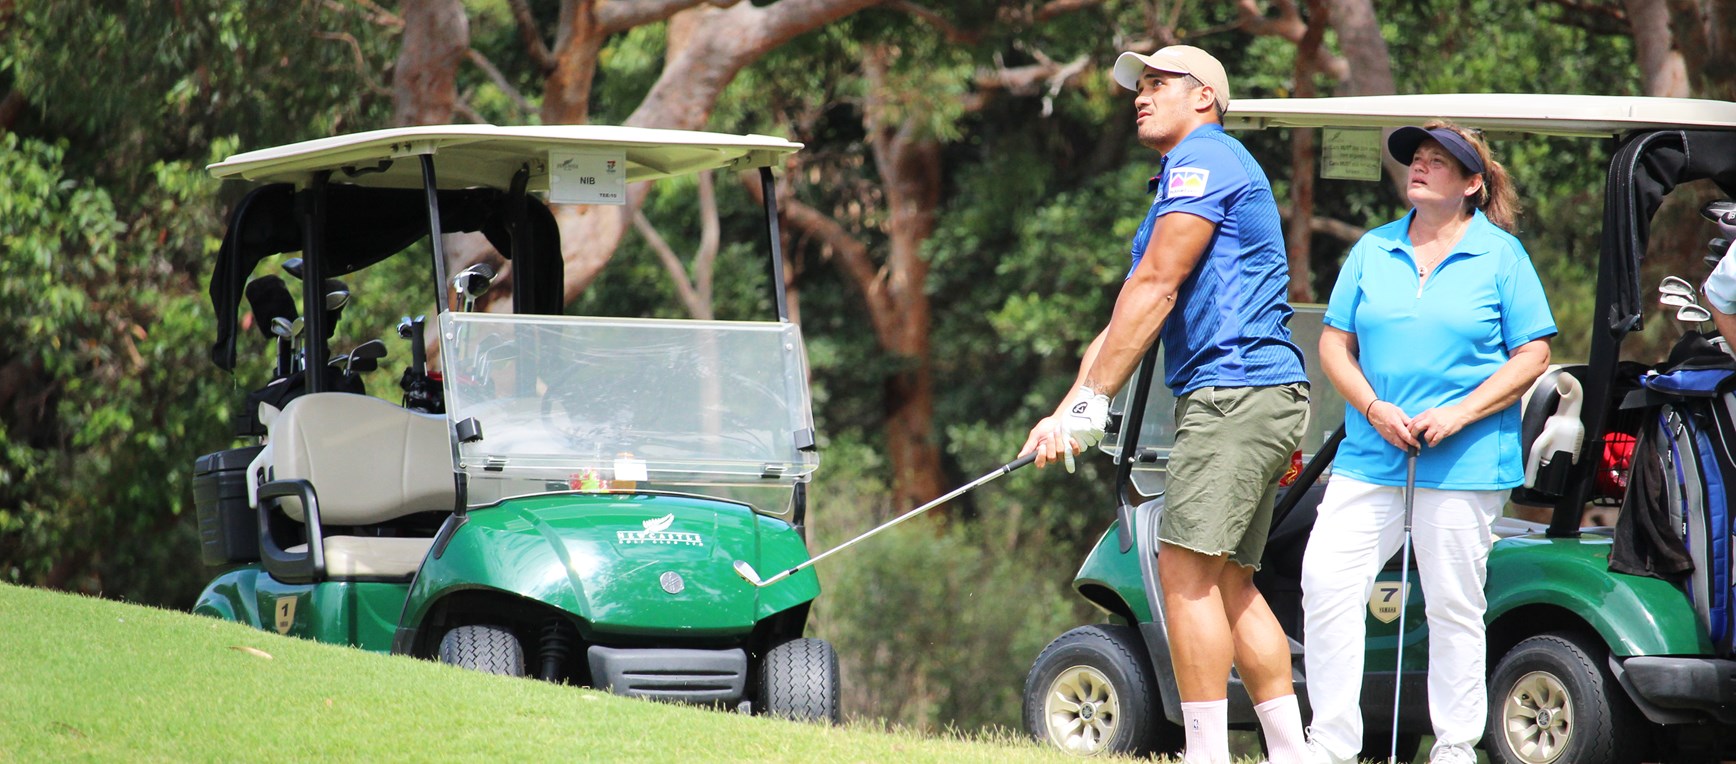 Gallery: Corporate Golf Day